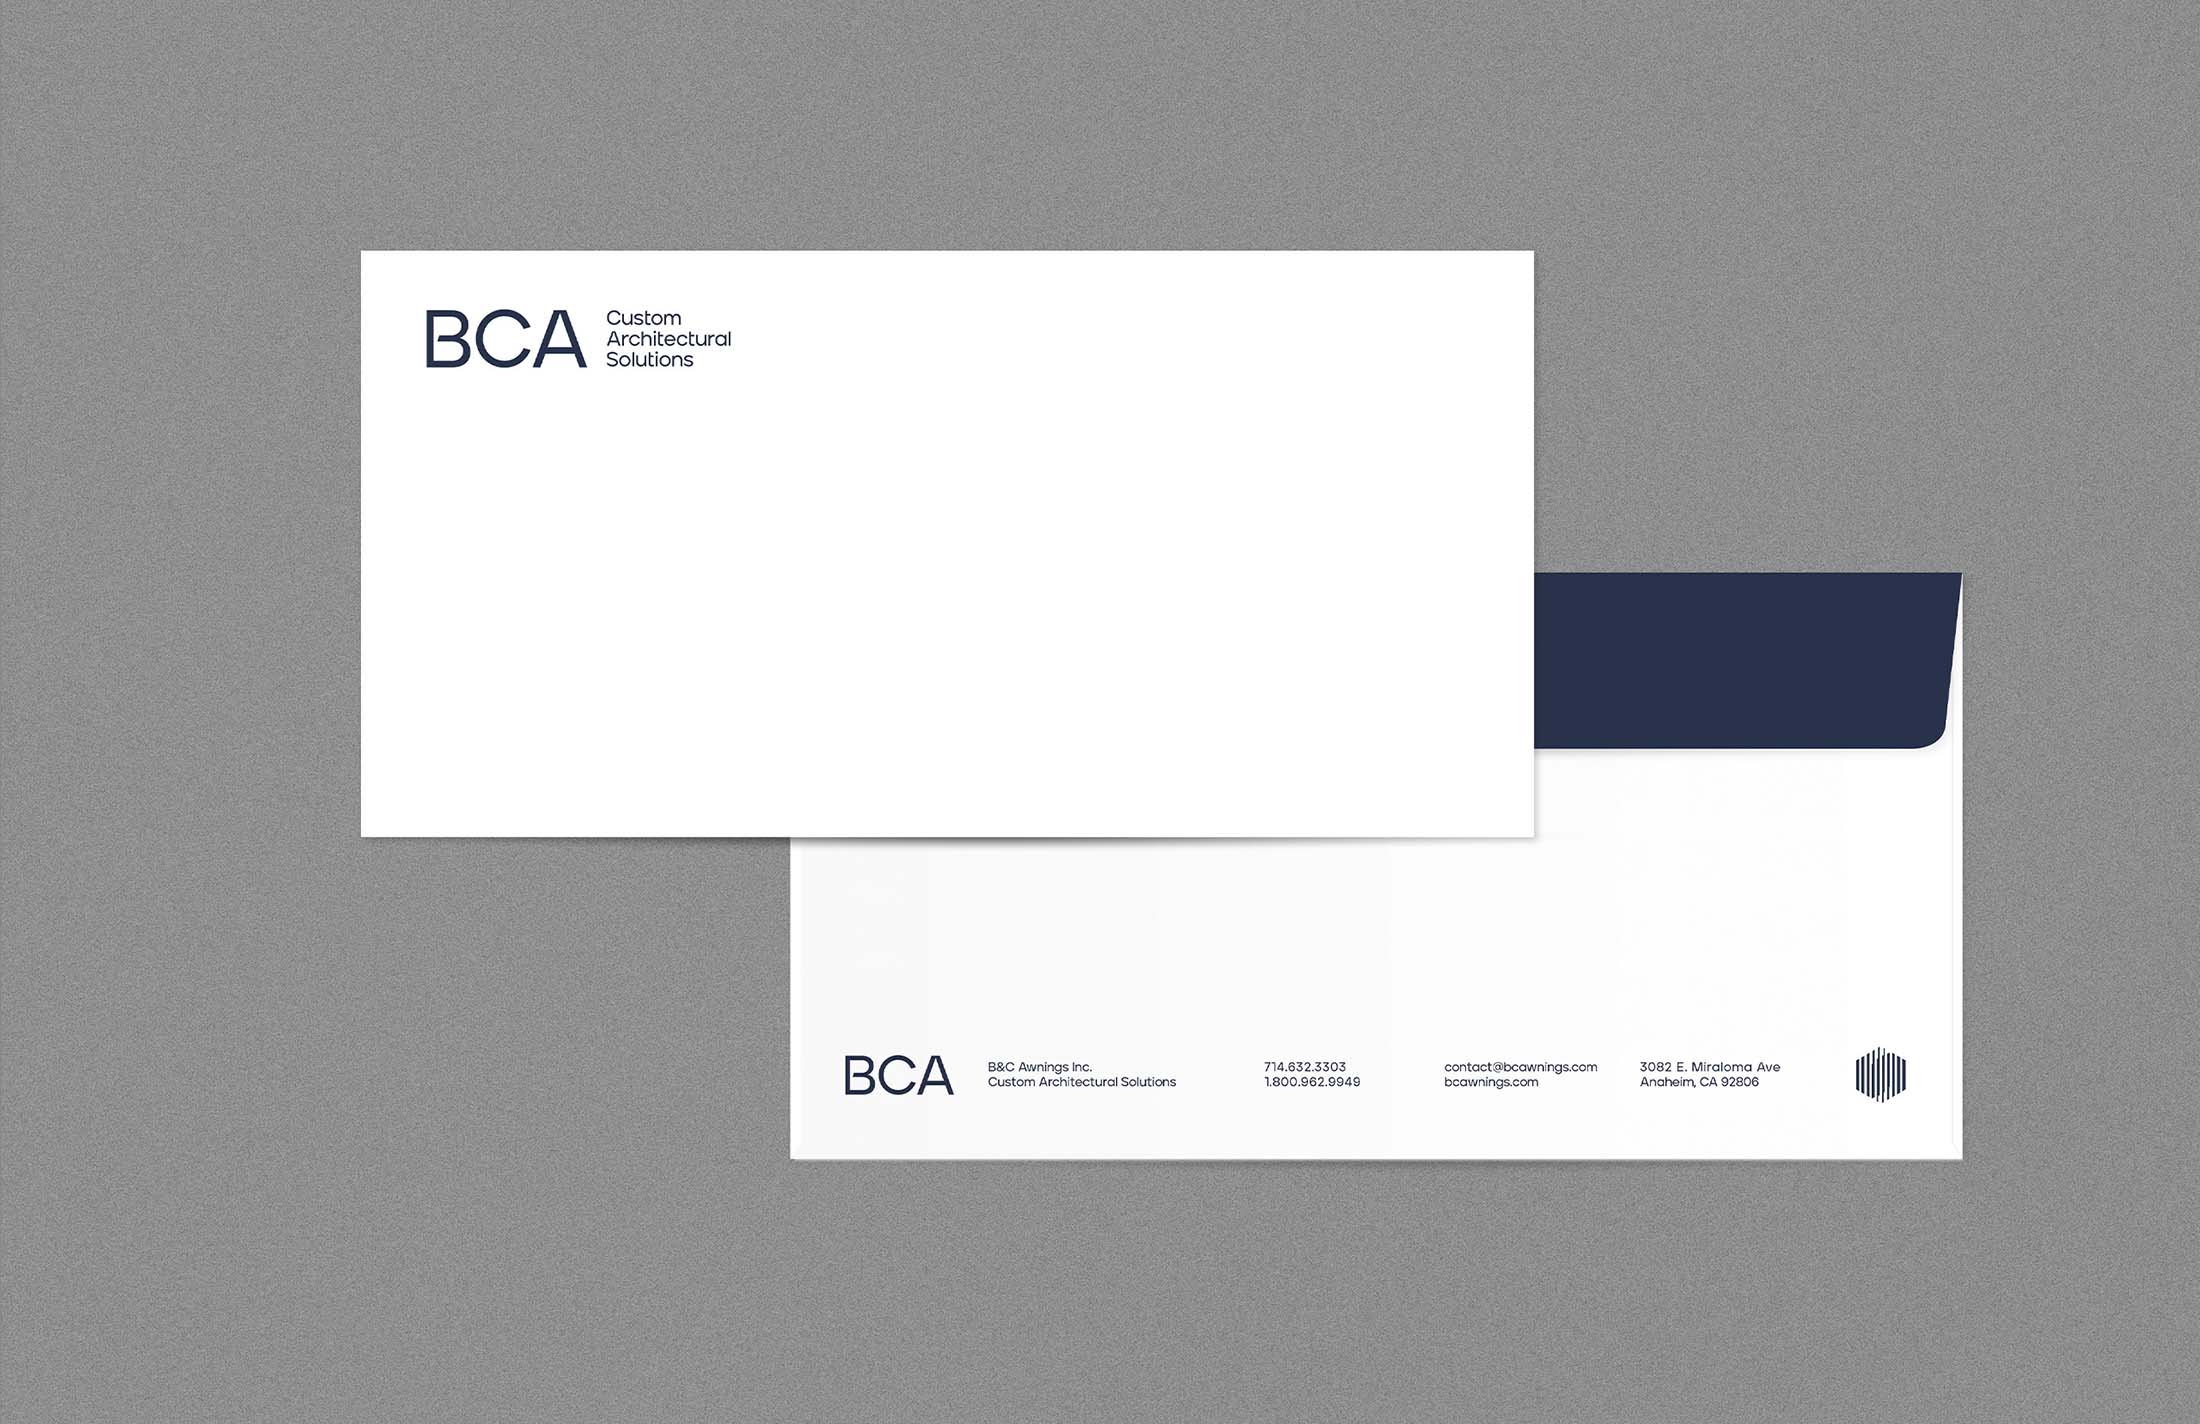 Brand stationary envelope - B&C Awnings - Whiskey and Red Small Business Branding and Website Design Packages